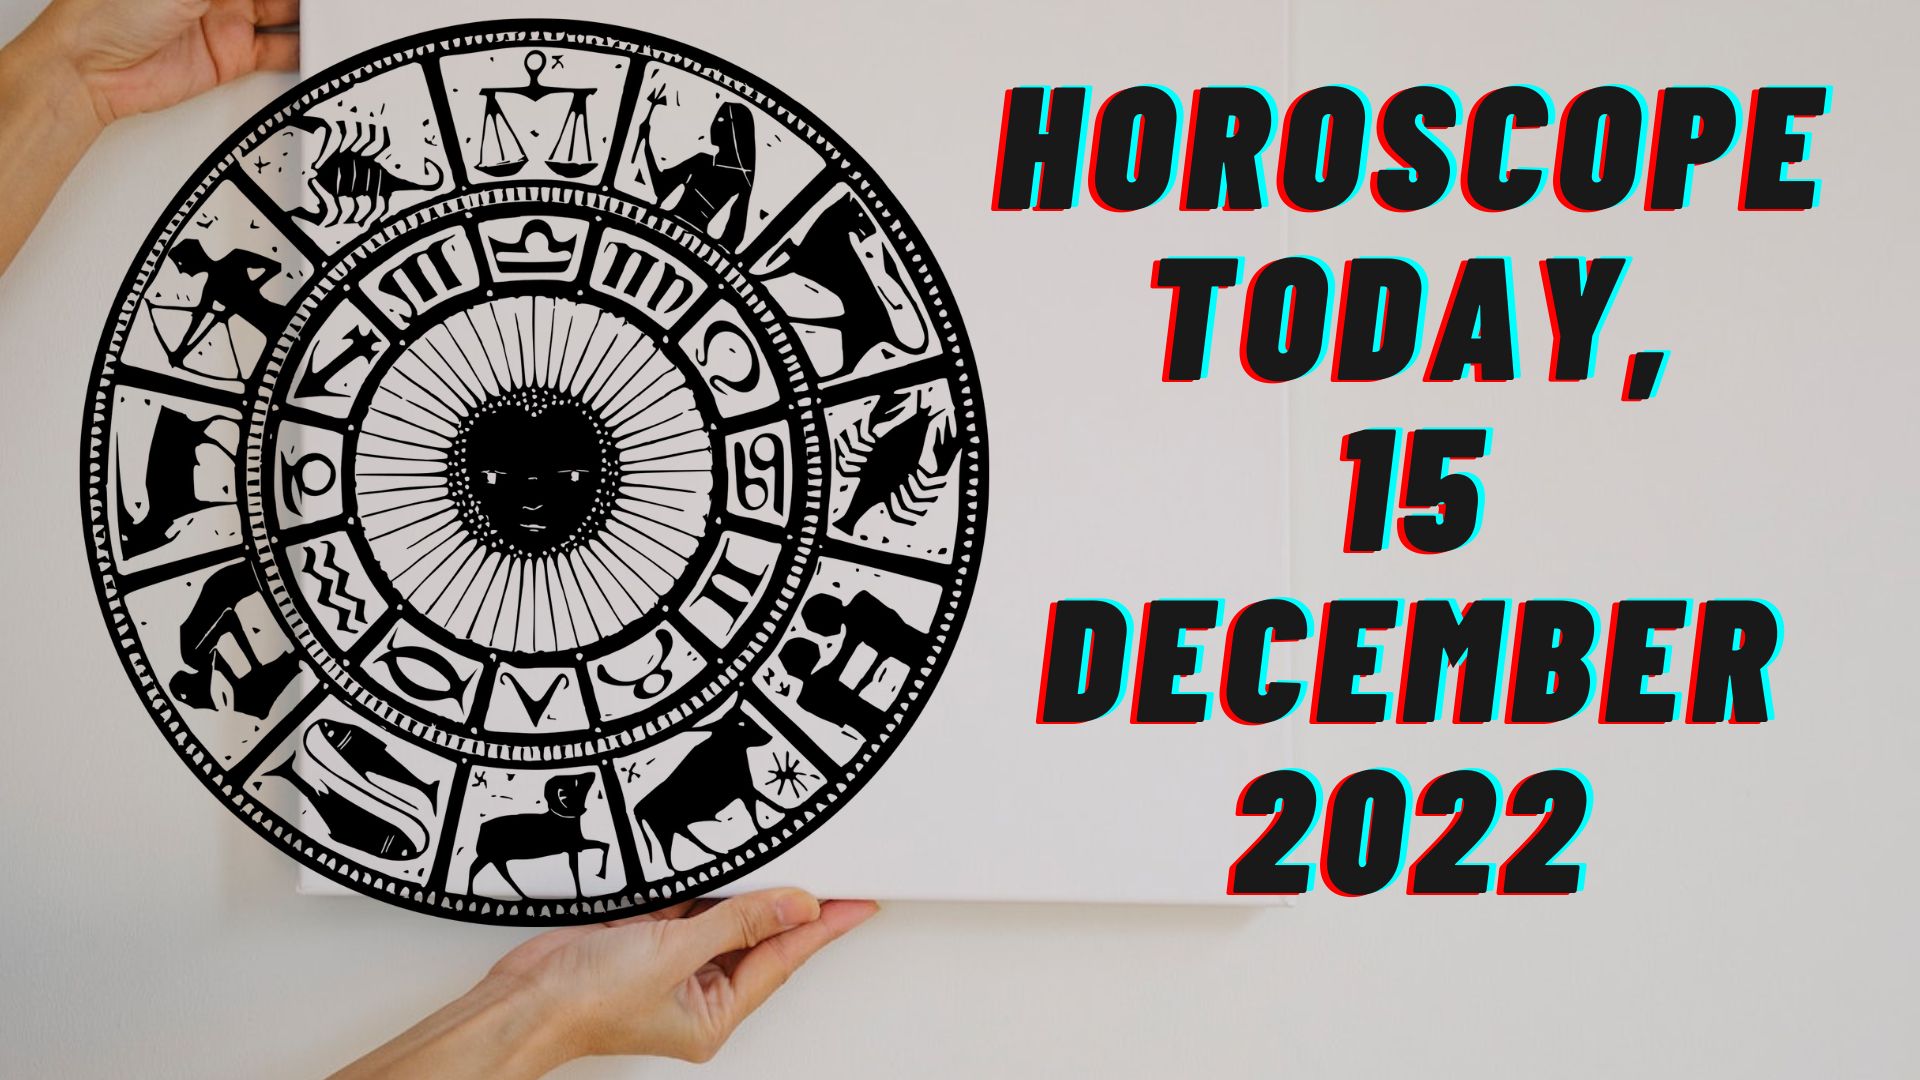 Horoscope Today, 15 December 2022 - Check Astrological Prediction Of Your Zodiac Sign